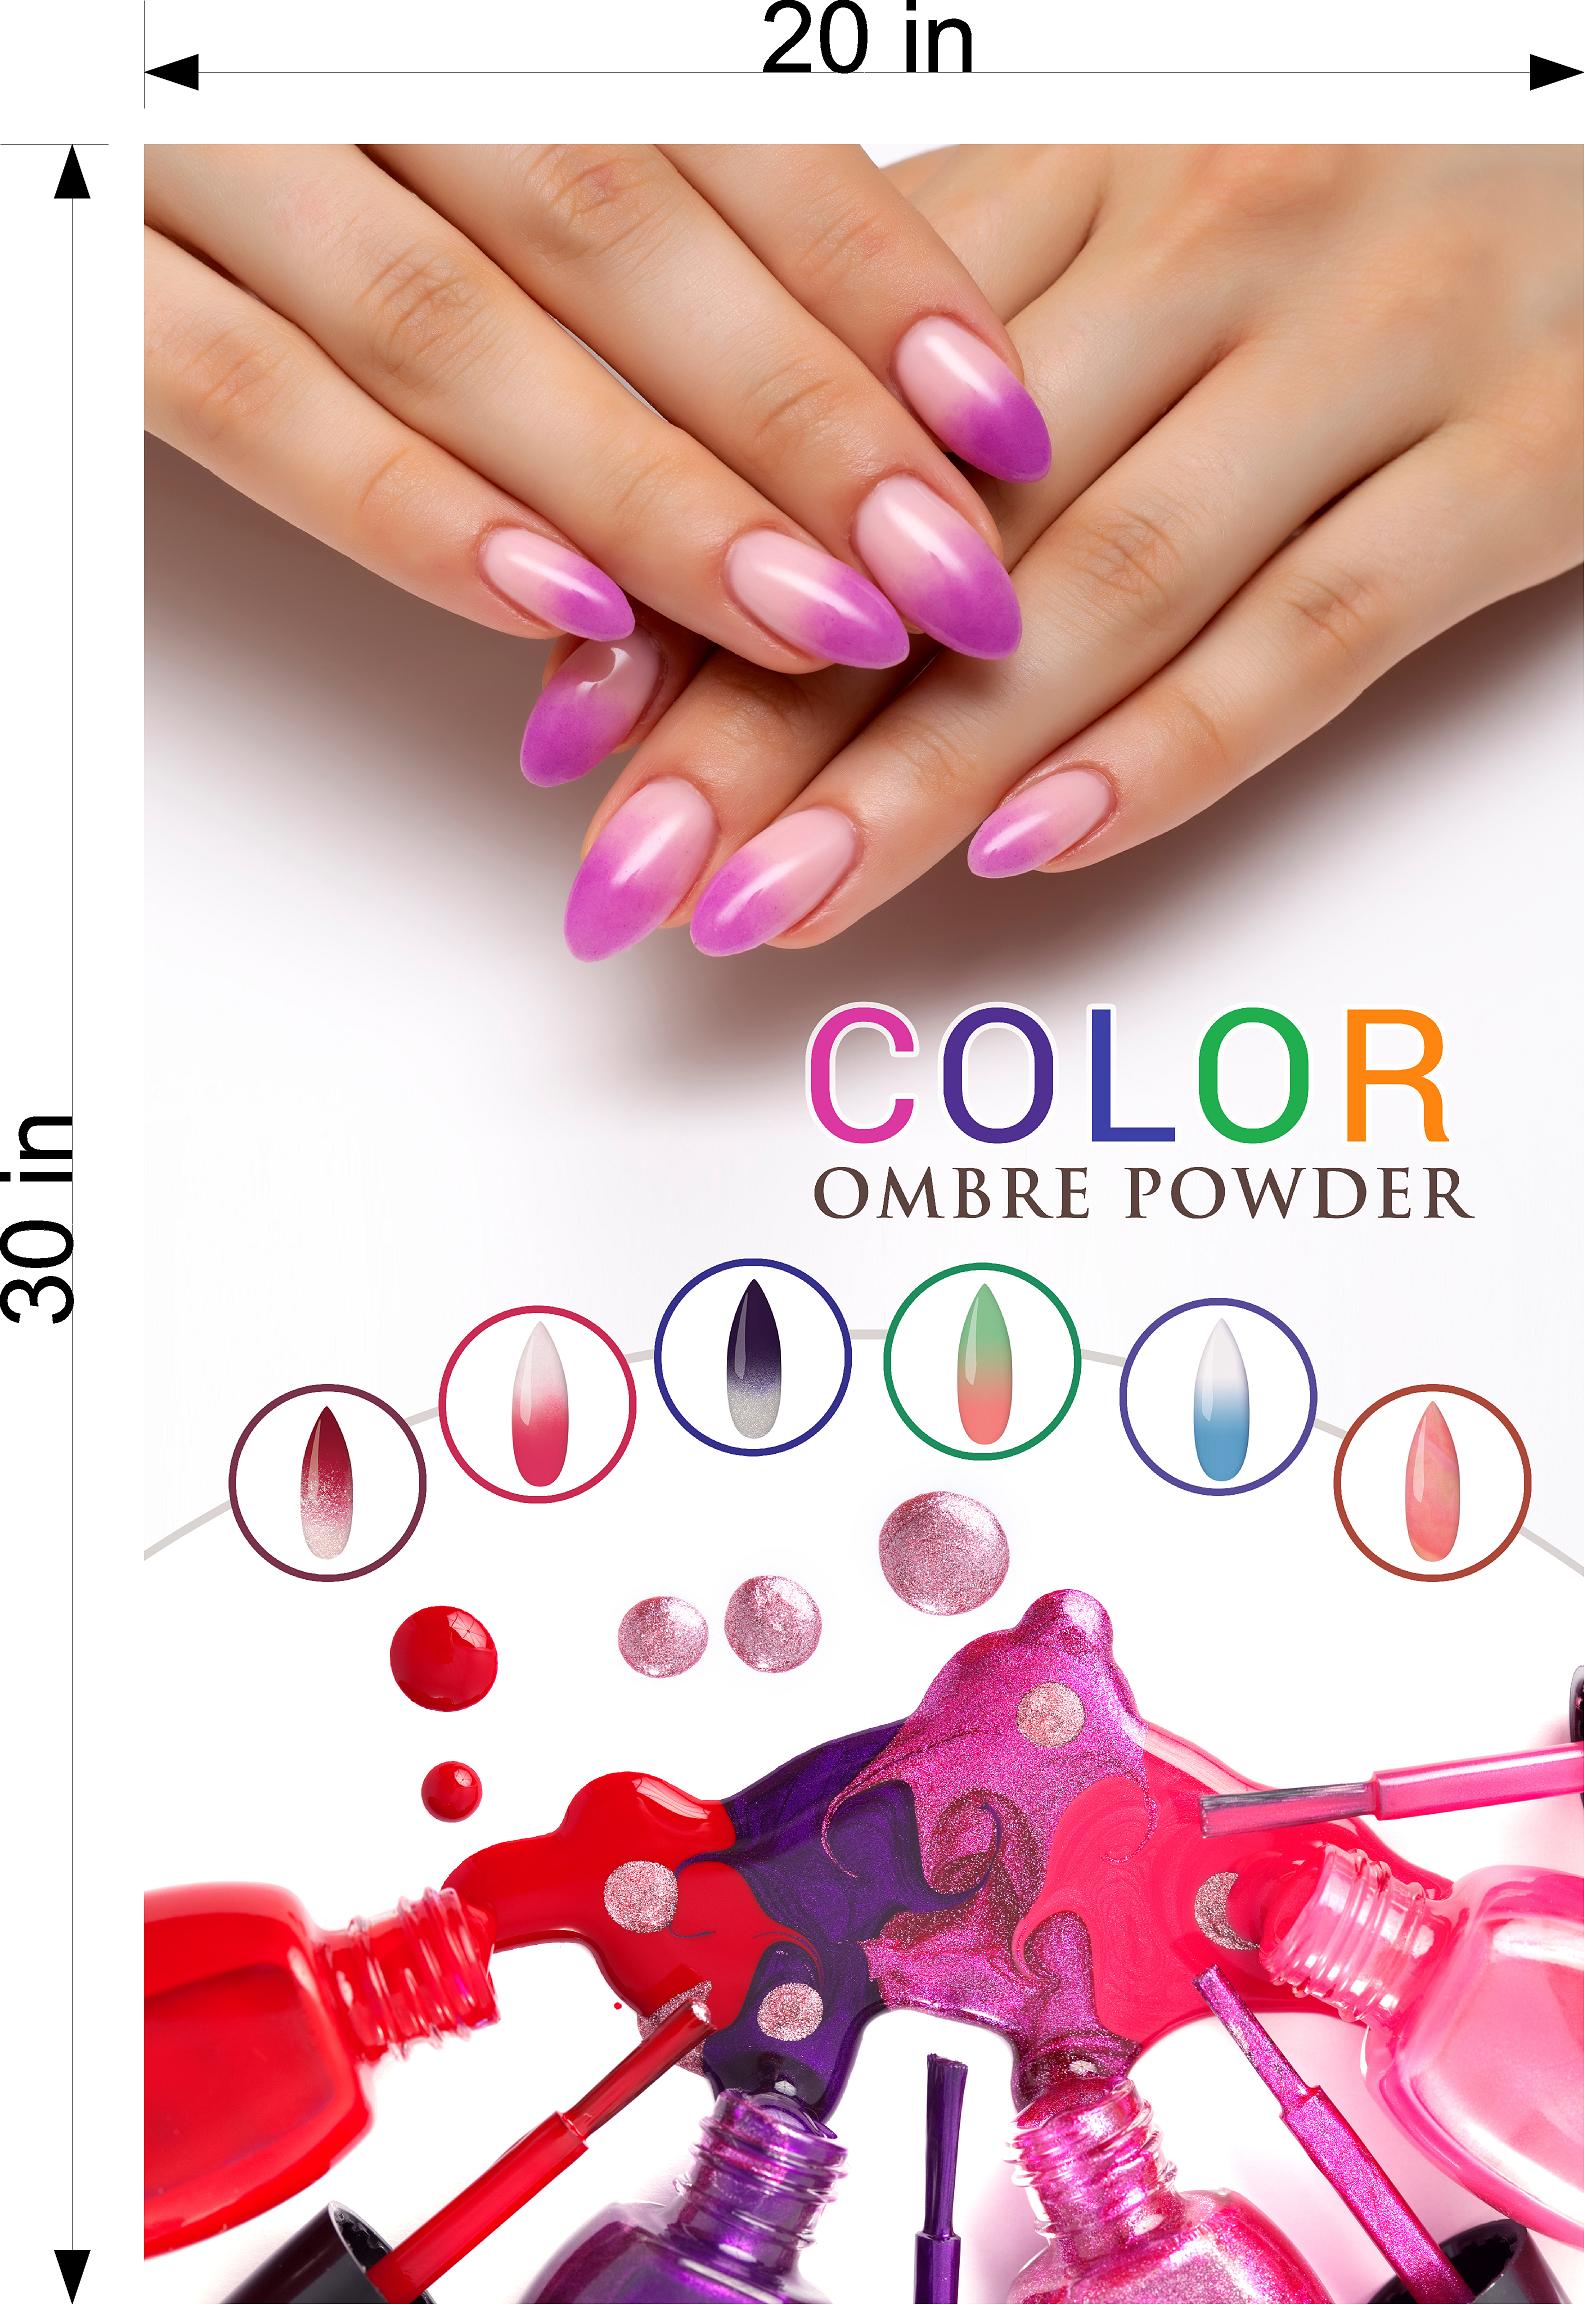 Ombre Nails 03 Photo-Realistic Paper Poster Premium Salon Interior Inside Sign Advertising Marketing Wall Window Non-Laminated Vertical